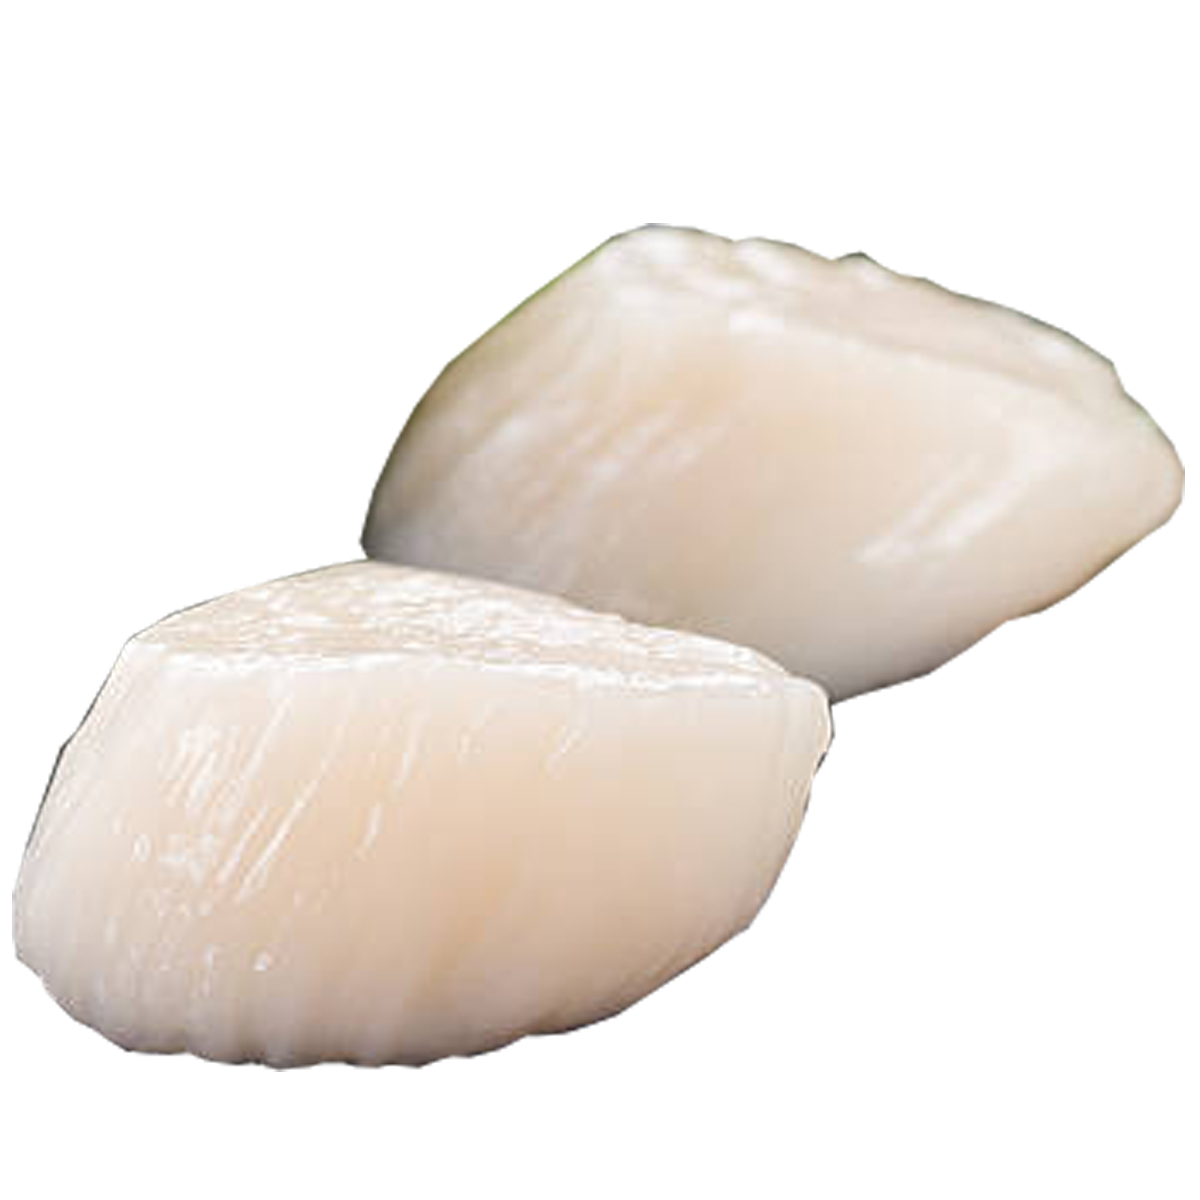 US Scallops 25 to 35 pieces per pack, 1 kg